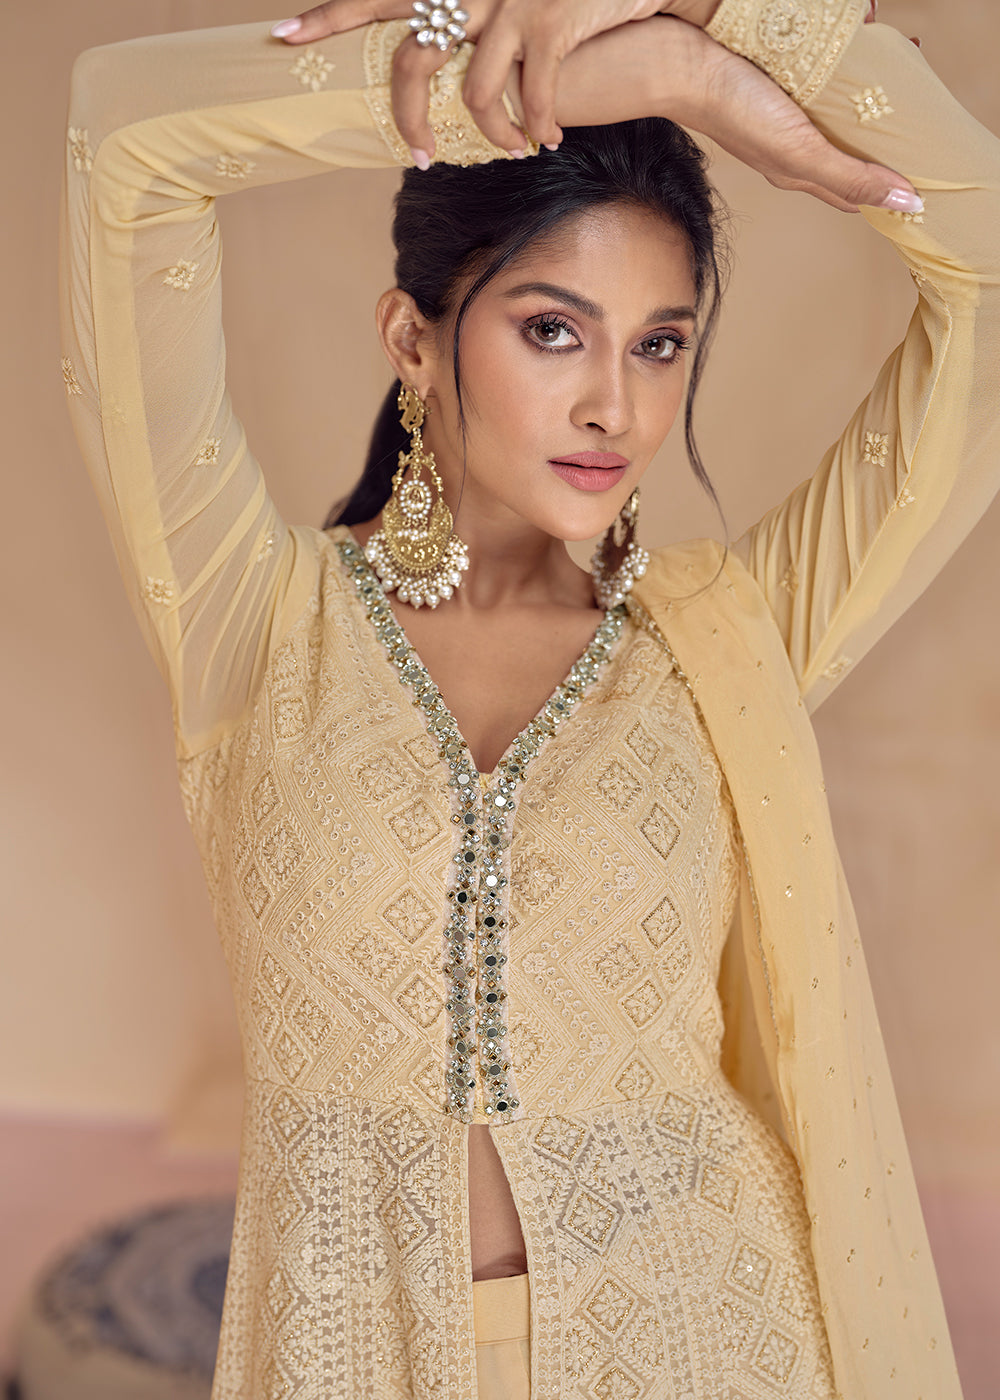 Buy Now Palazzo Style Fawn Yellow Lucknowi Embroidered Anarkali Suit Online in USA, UK, Australia, New Zealand, Canada & Worldwide at Empress Clothing.